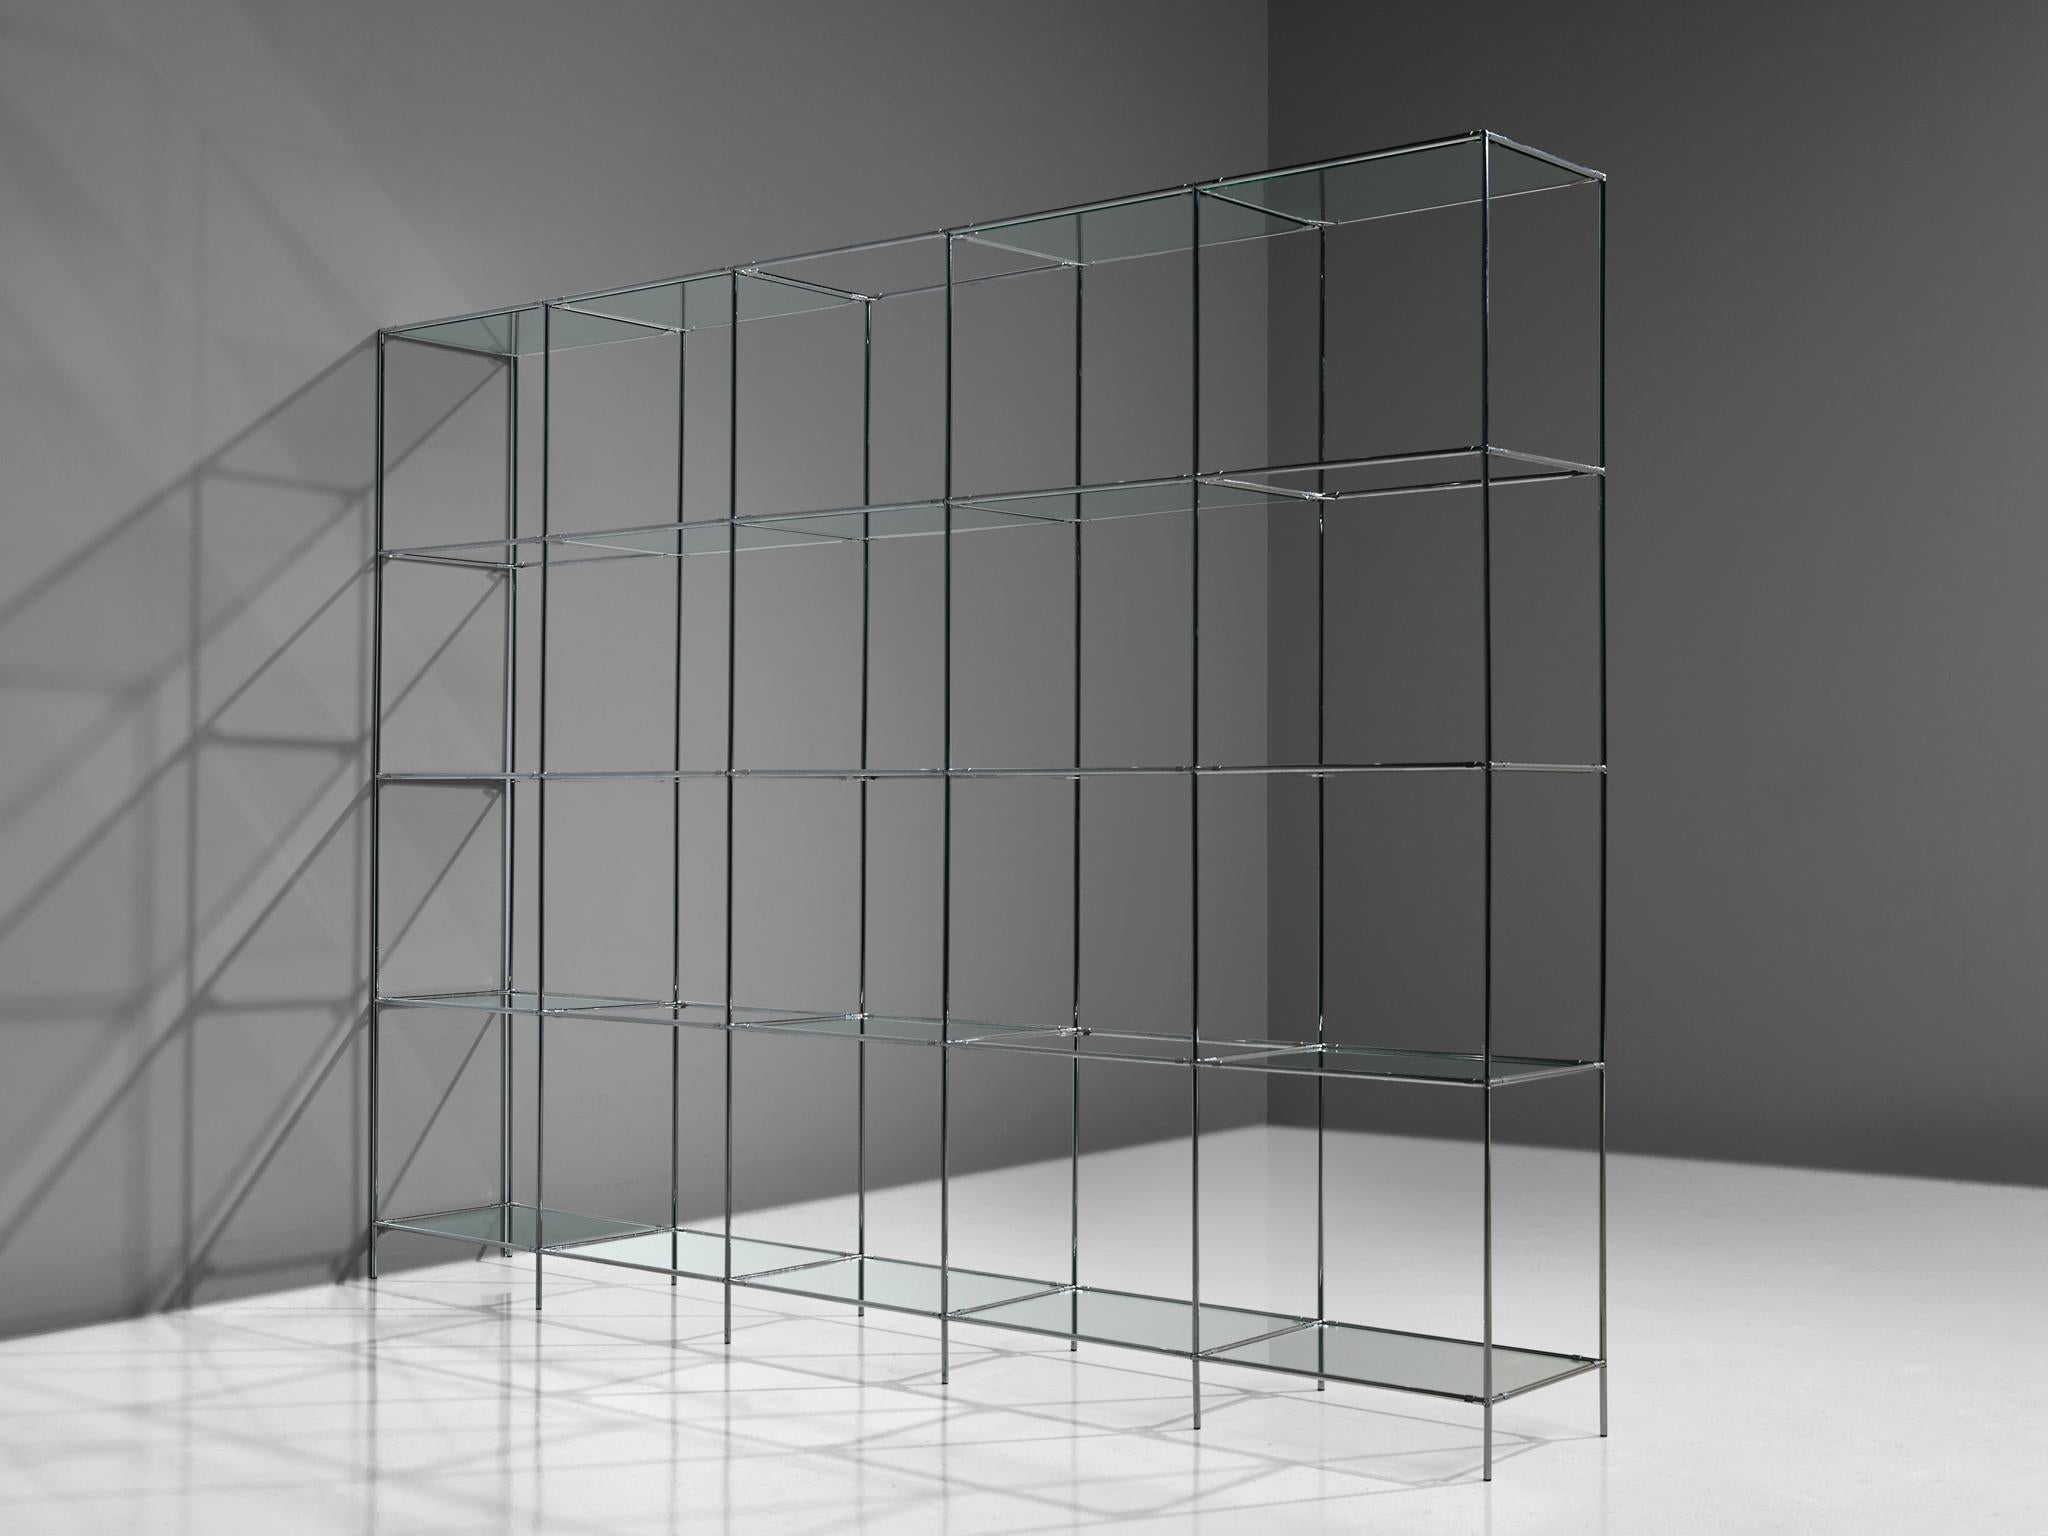 Poul Cadovius for Royal System, modular shelving unit and roomdivider, glass and chrome-plated steel, Denmark, 1960s.

This Minimalist shelving unit was designed by Poul Cadovius (1911-2011) and produced by Royal System, Denmark, circa 1960. This